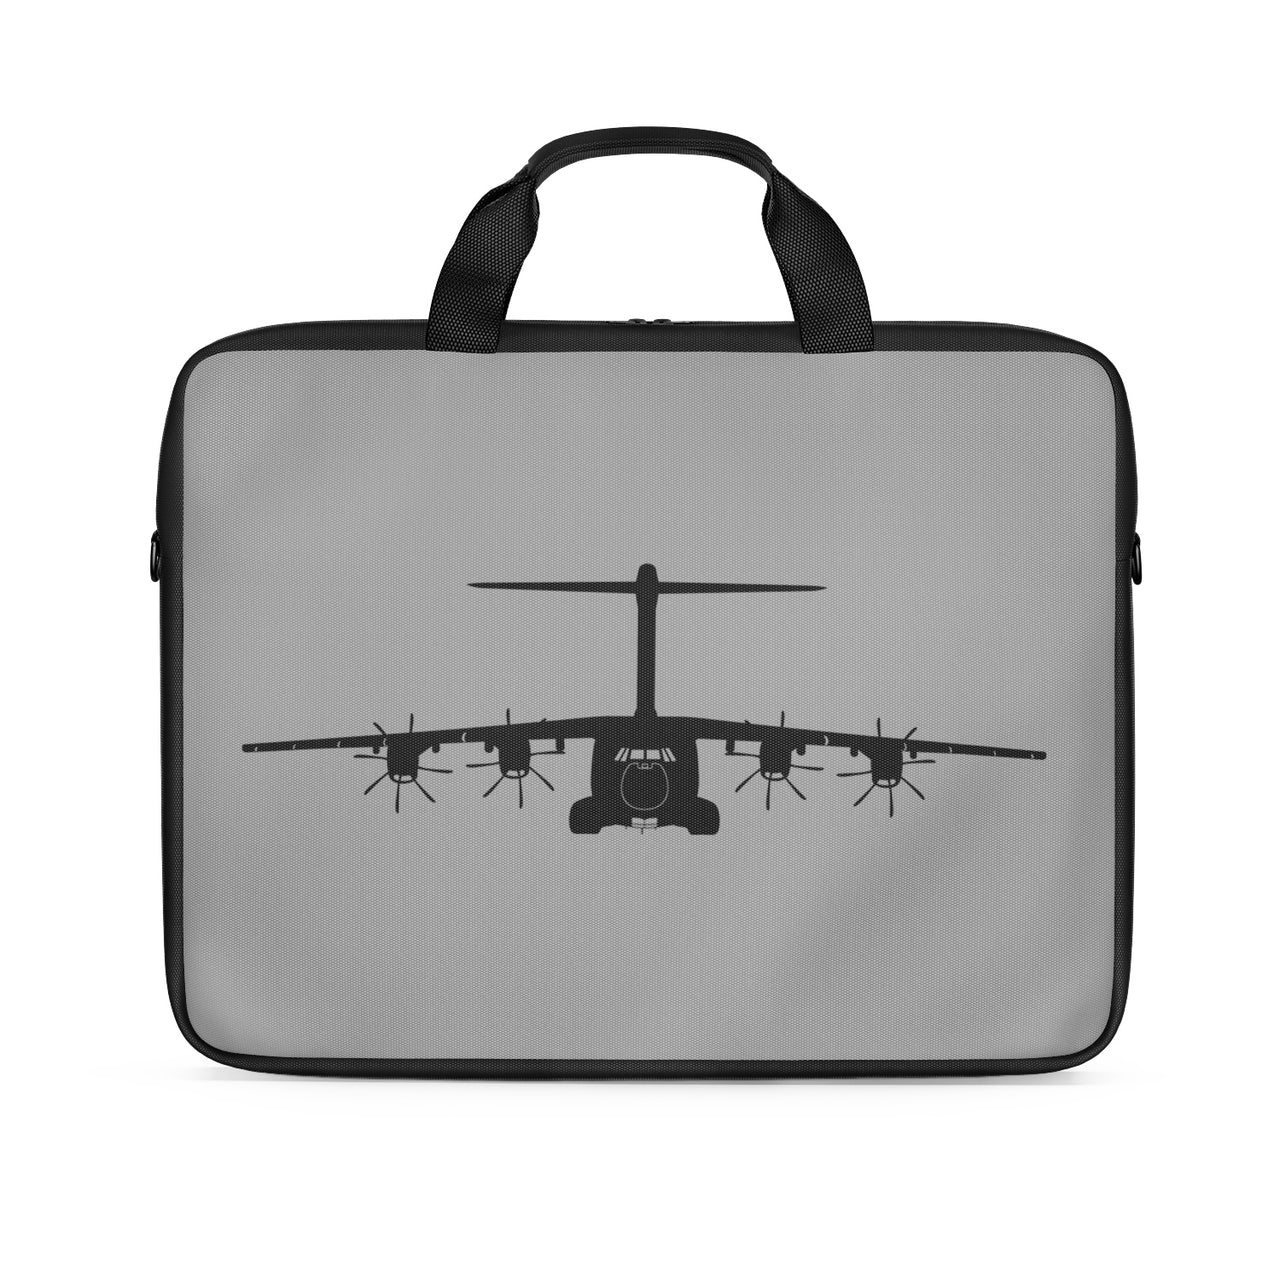 Airbus A400M Silhouette Designed Laptop & Tablet Bags